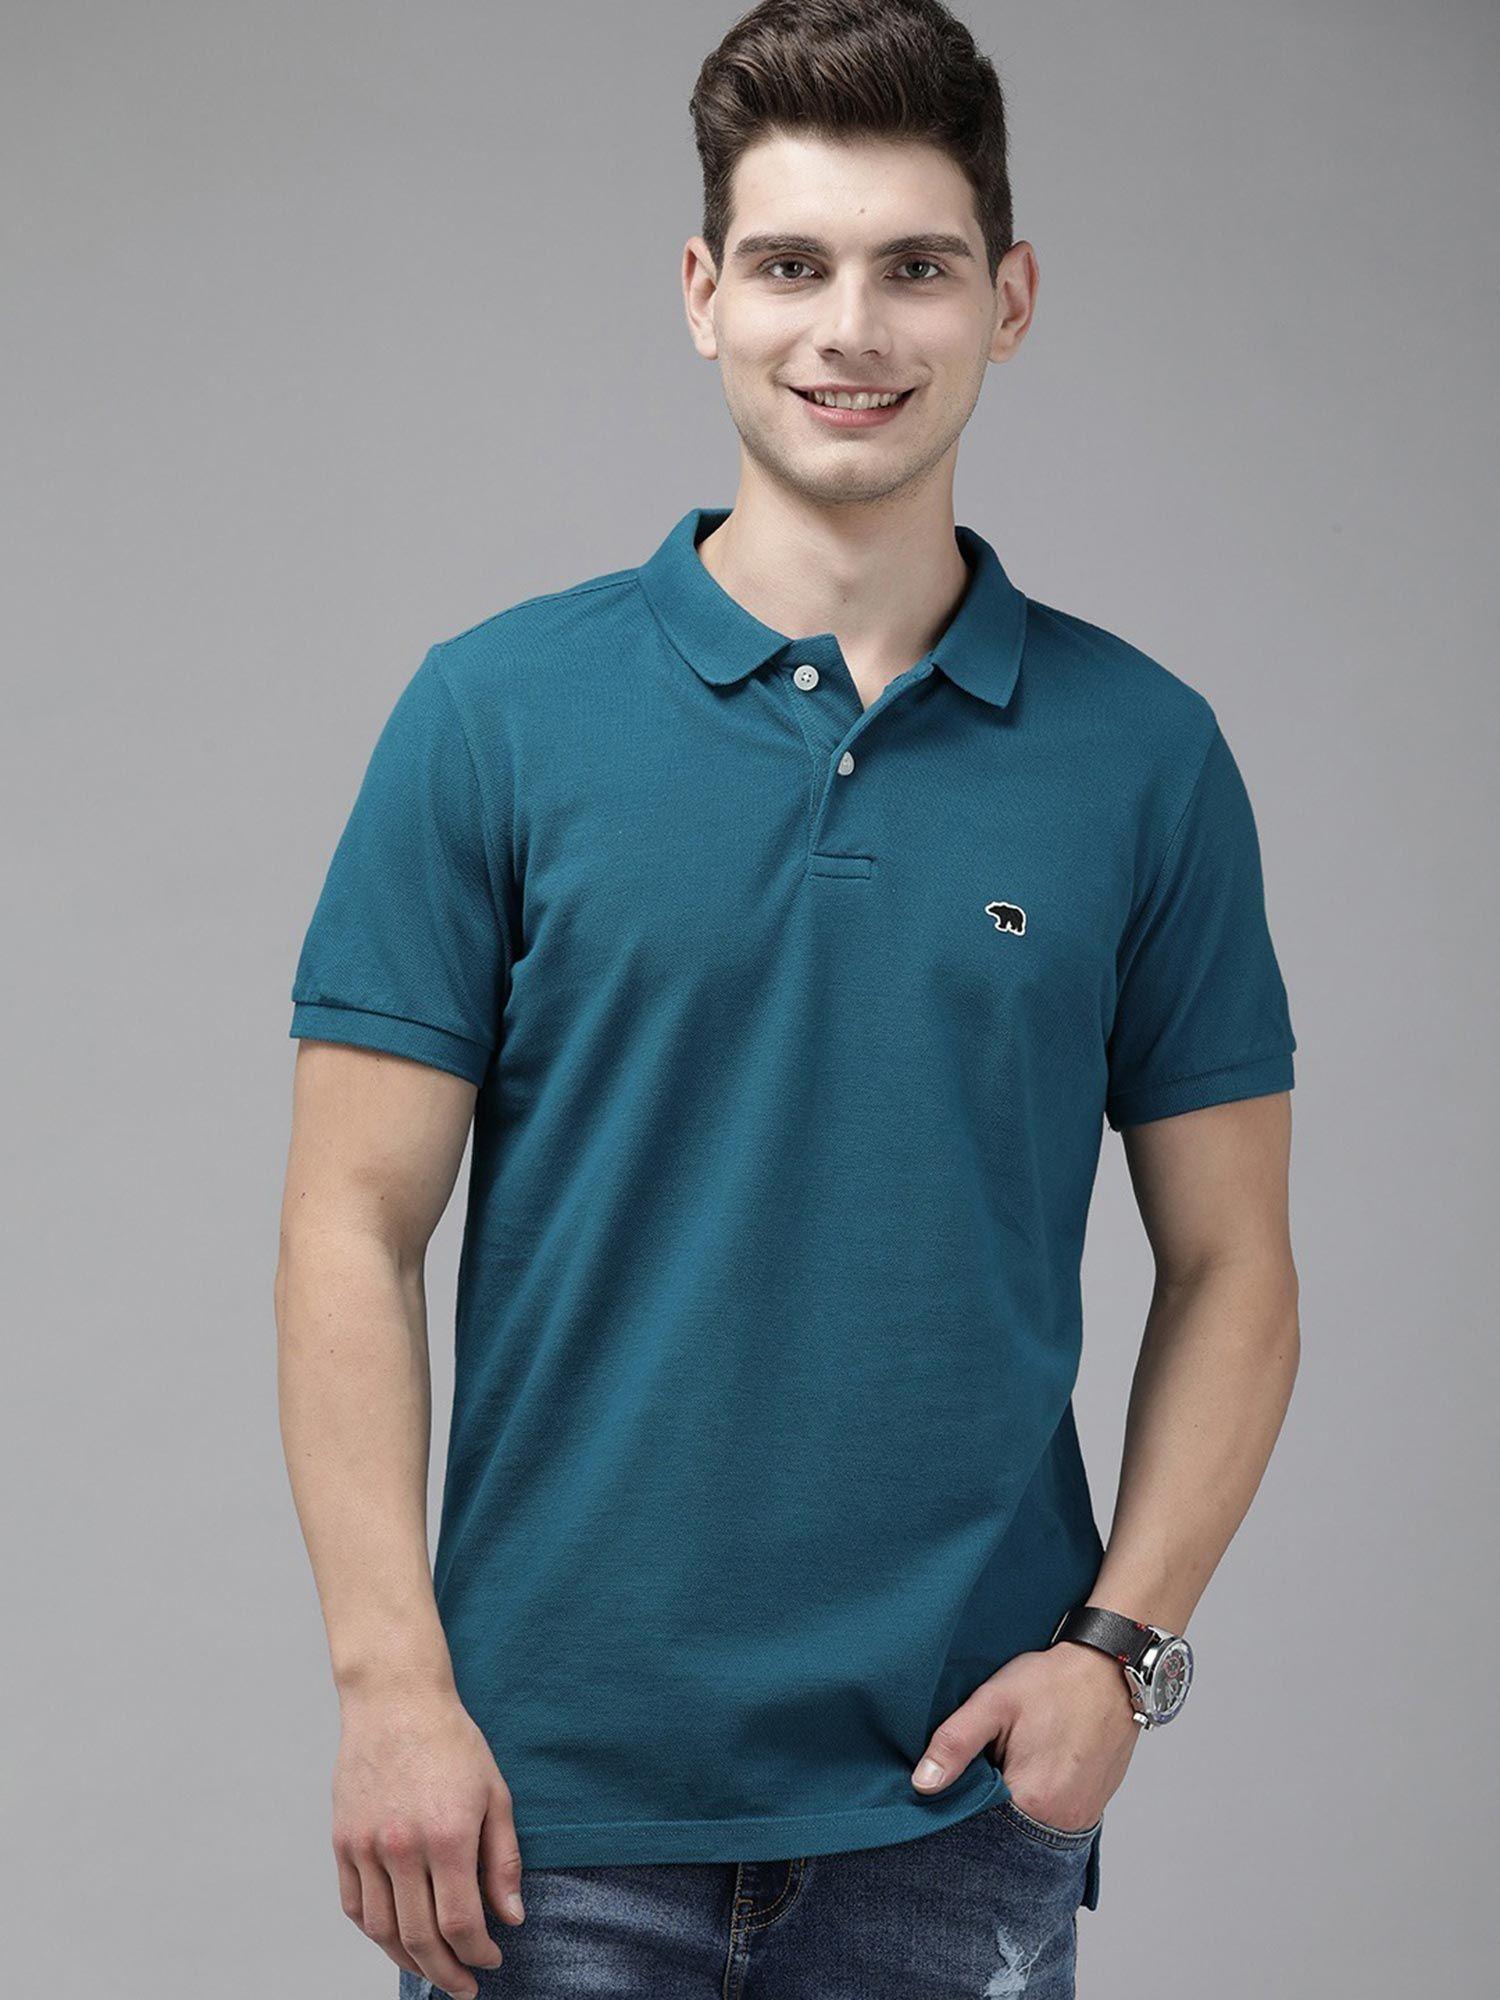 men's teal overdyed slim fit polo